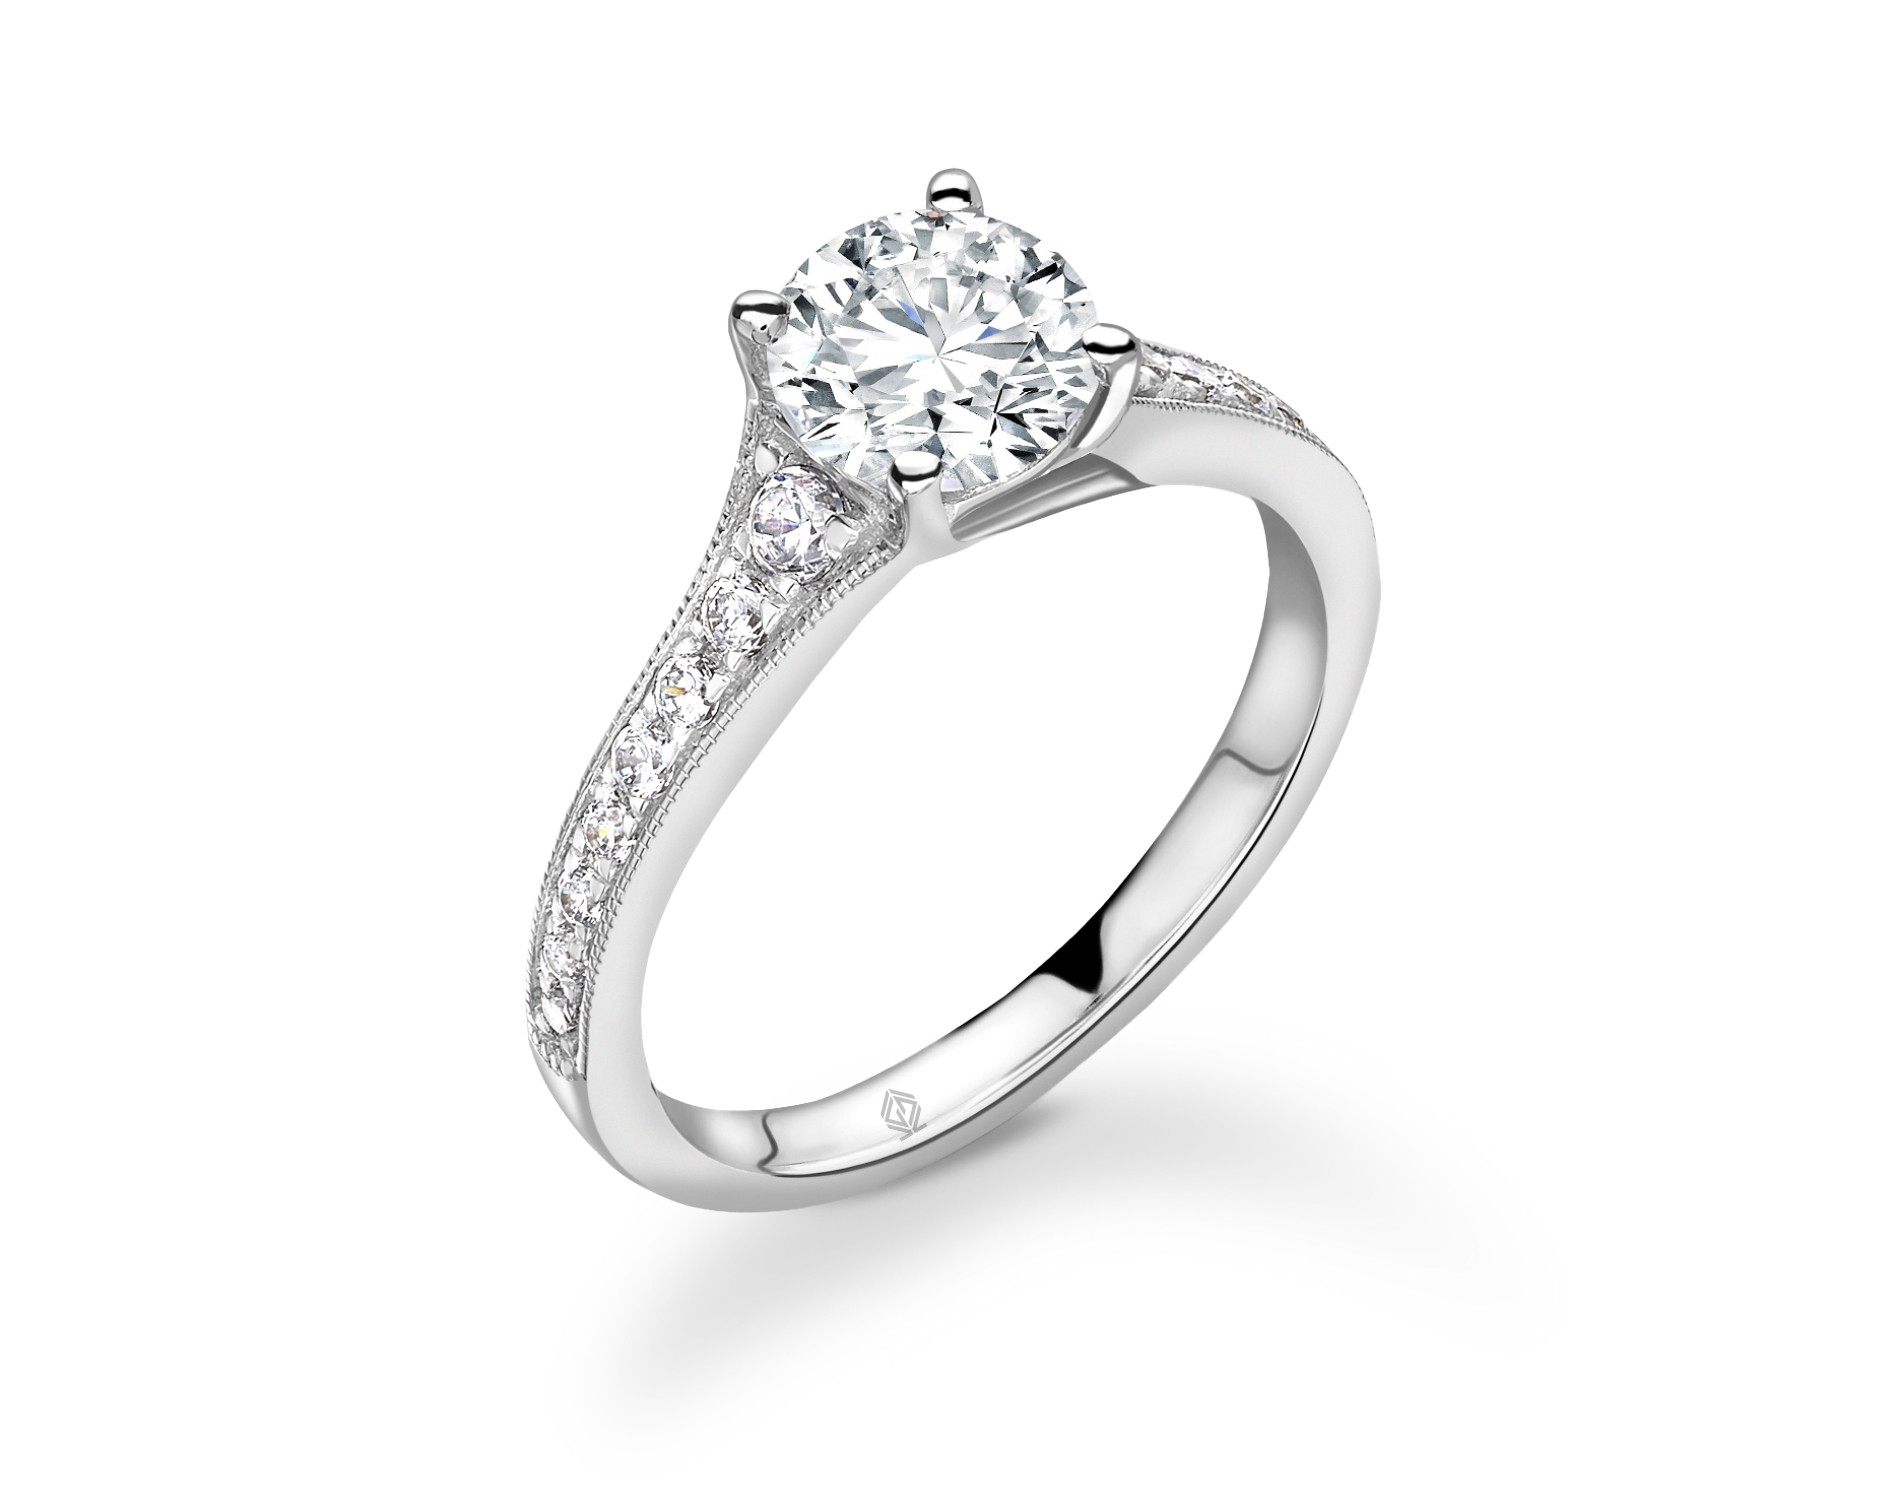 18K WHITE GOLD ROUND CUT 4 PRONGS DIAMOND ENGAGEMENT RING WITH SIDE STONES CHANNEL SET